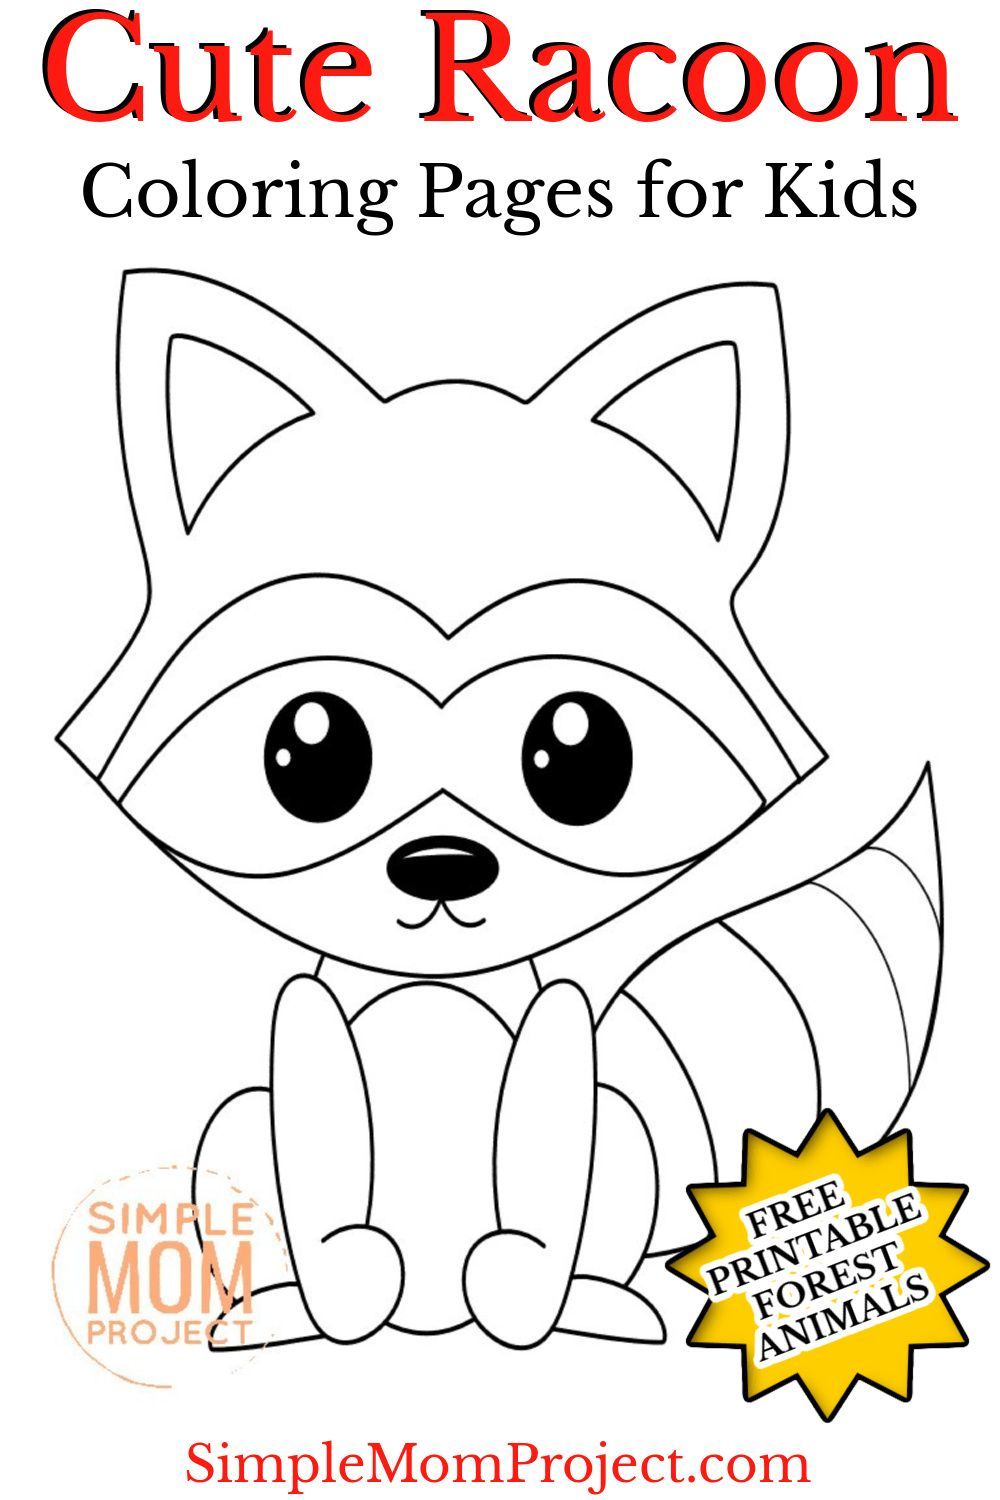 Free printable forest raccoon coloring page coloring pages racoon animal coloring pages